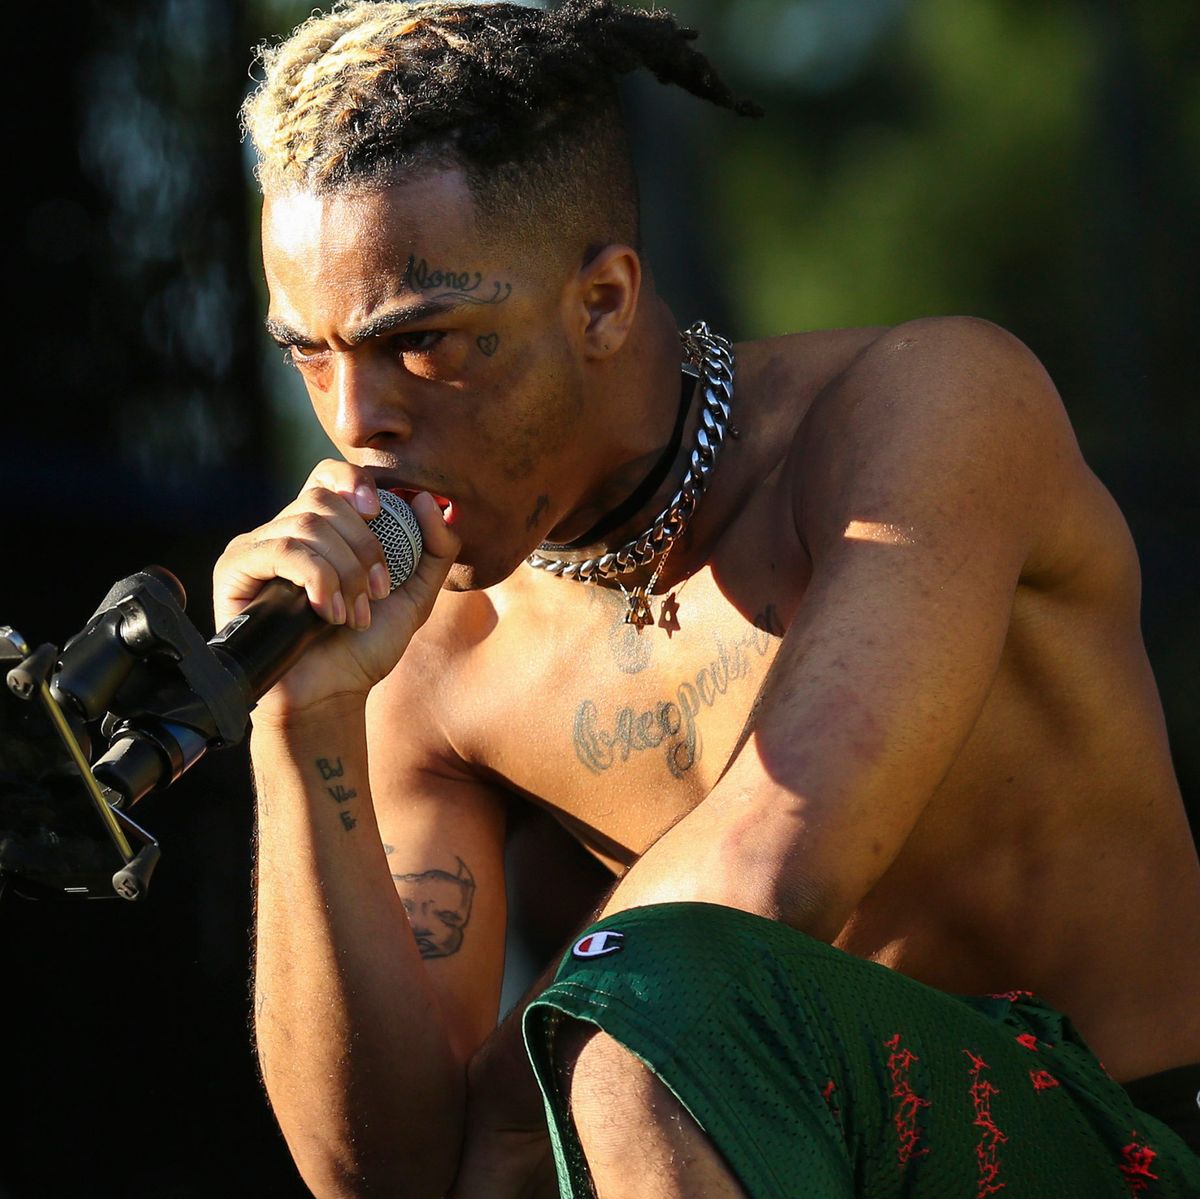 The Complicated Life And Death Of Xxxtentacion